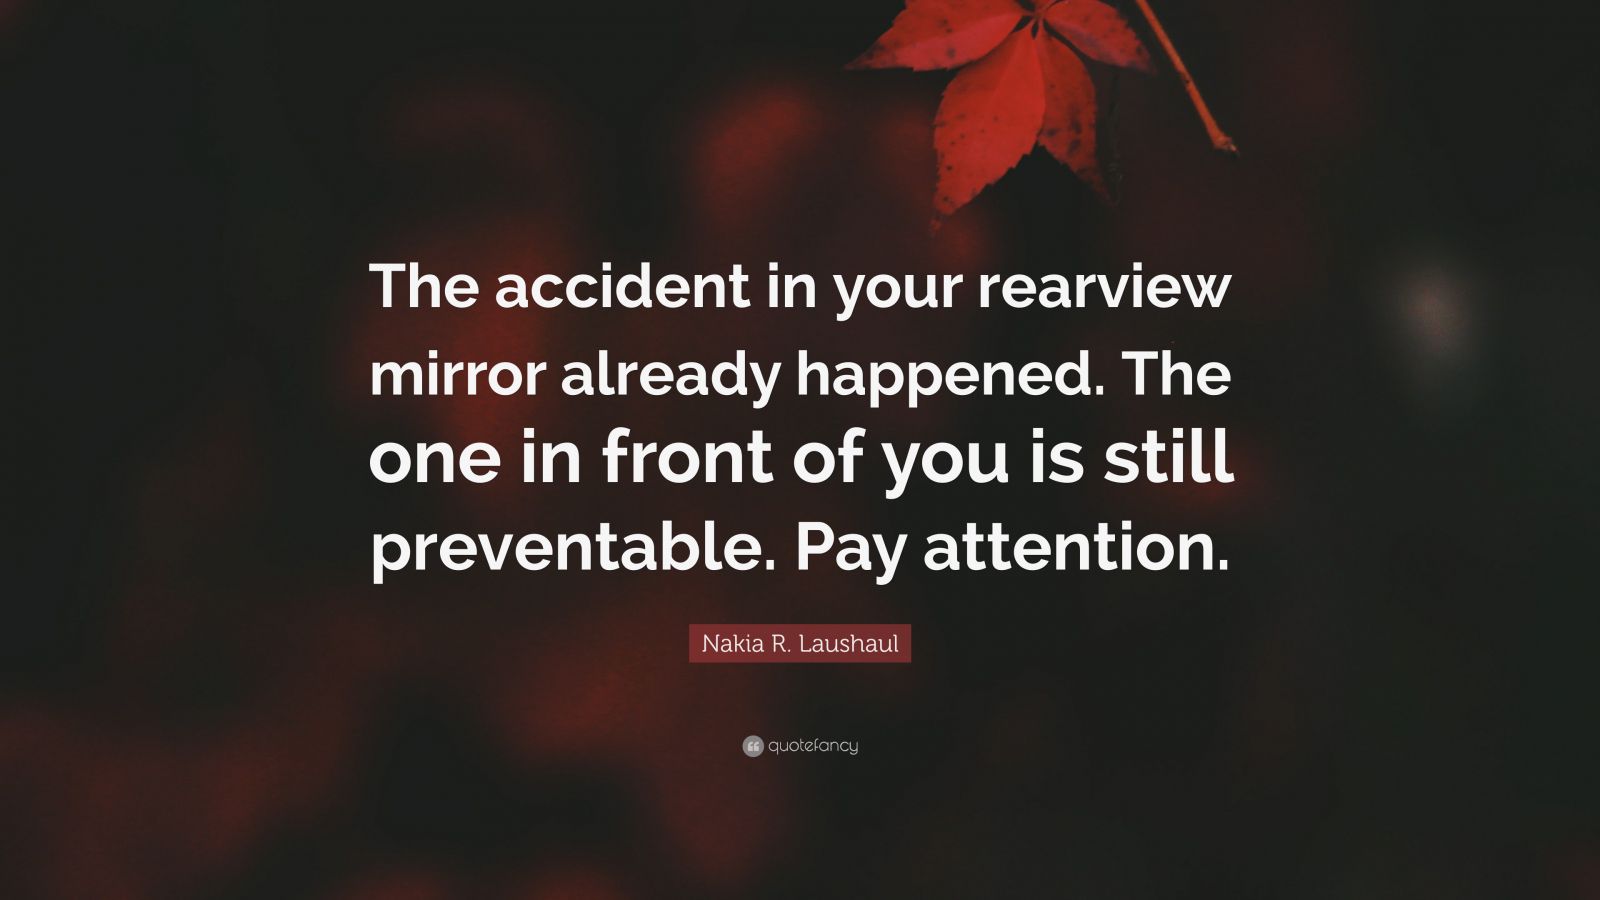 Nakia R. Laushaul Quote “The accident in your rearview mirror already